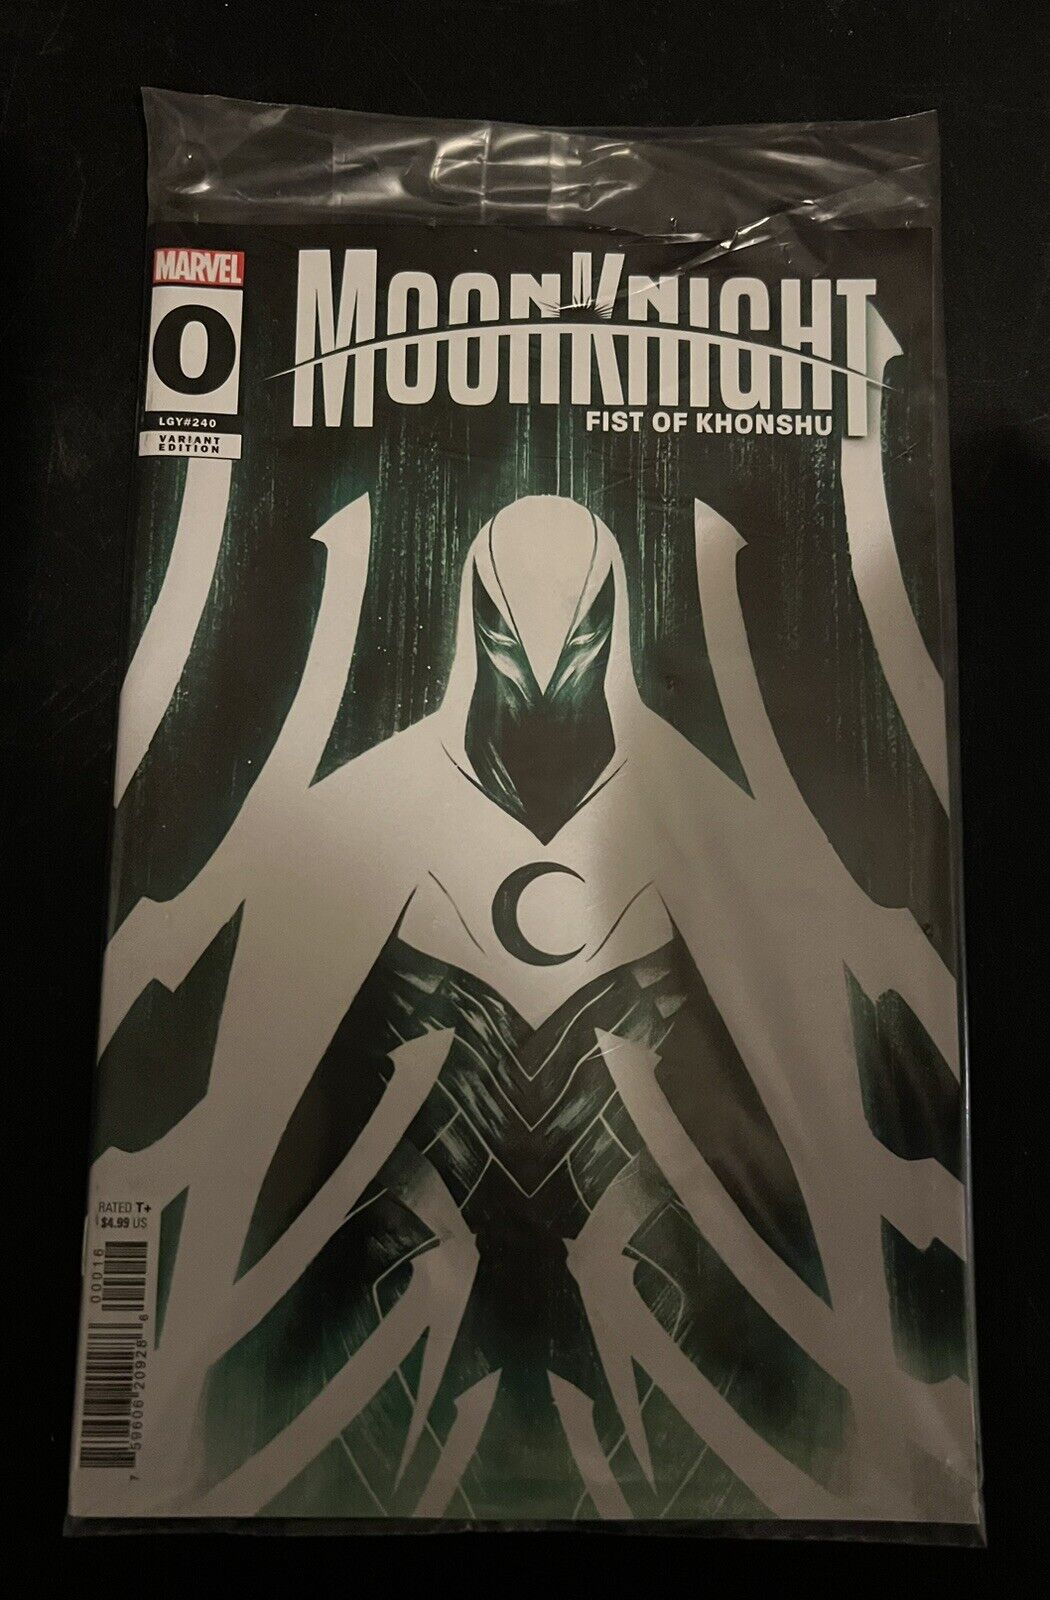 MOON KNIGHT FIST OF KHONSHU #0 CAPPUCCIO SECRET VARIANT SEALED(Polybagged) HOT🔥